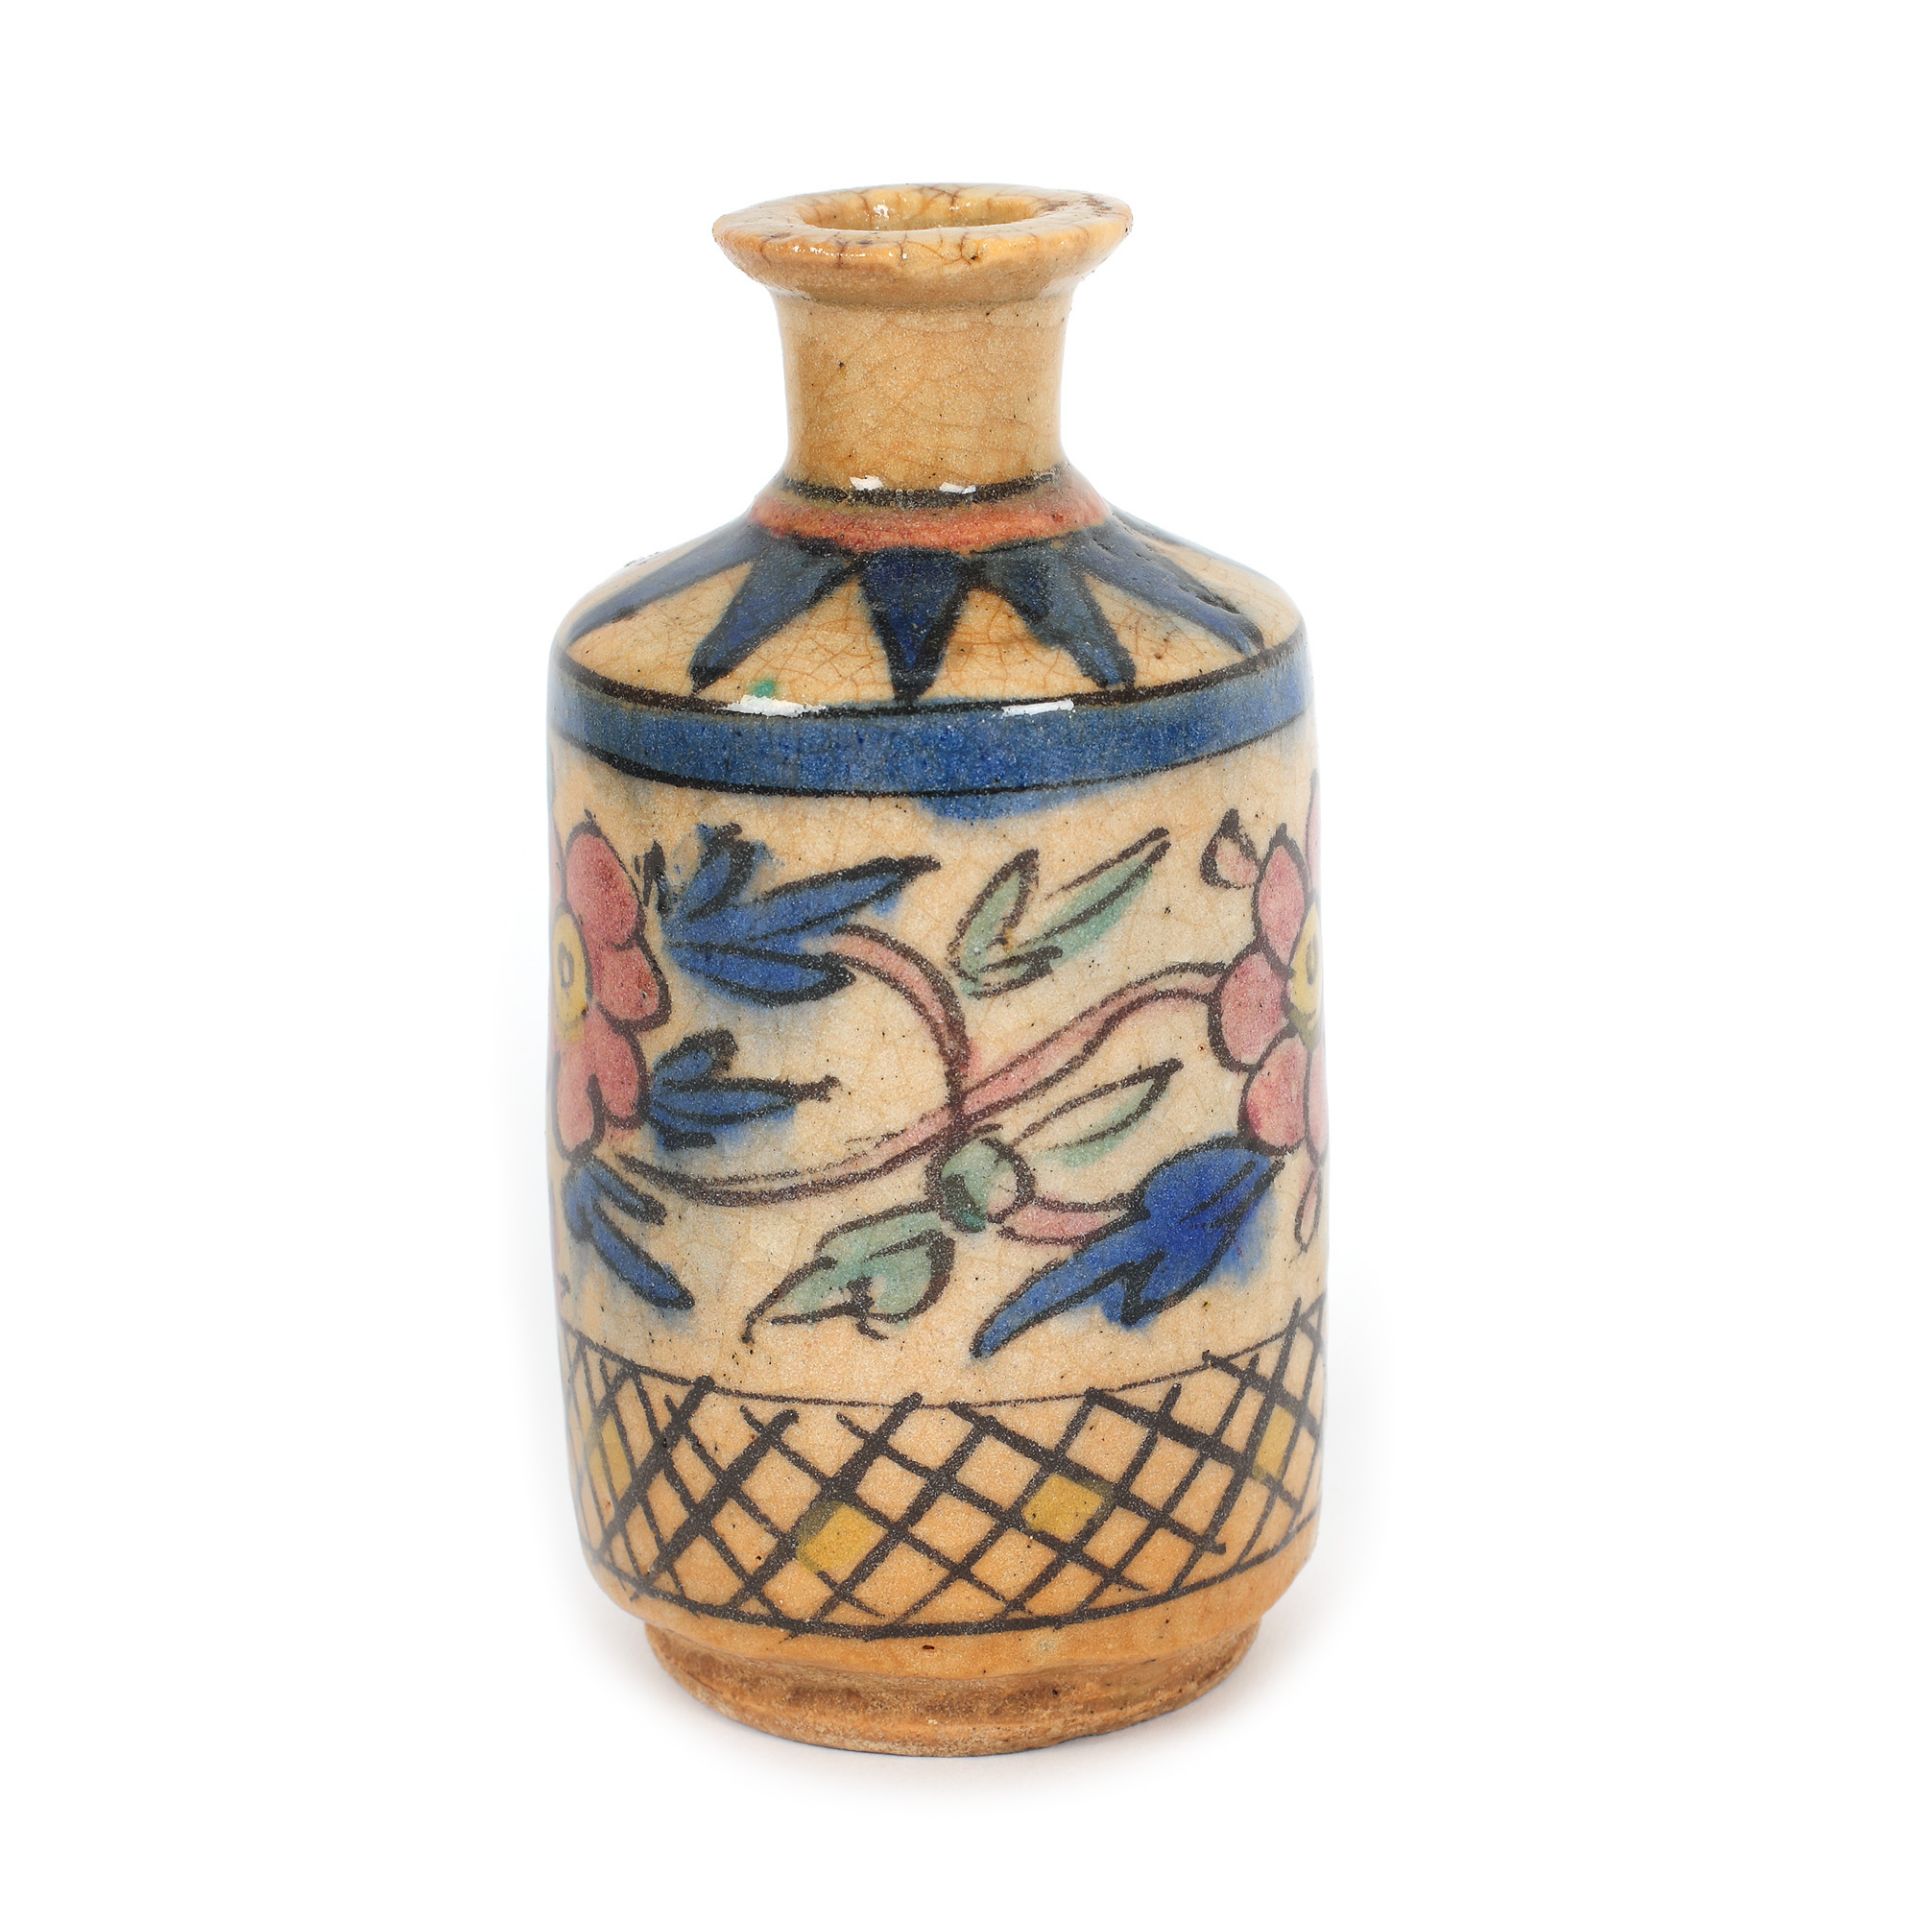 Painted and enamelled white ceramic vase decorated with floral motifs, Persia, late 19th century - Image 2 of 3